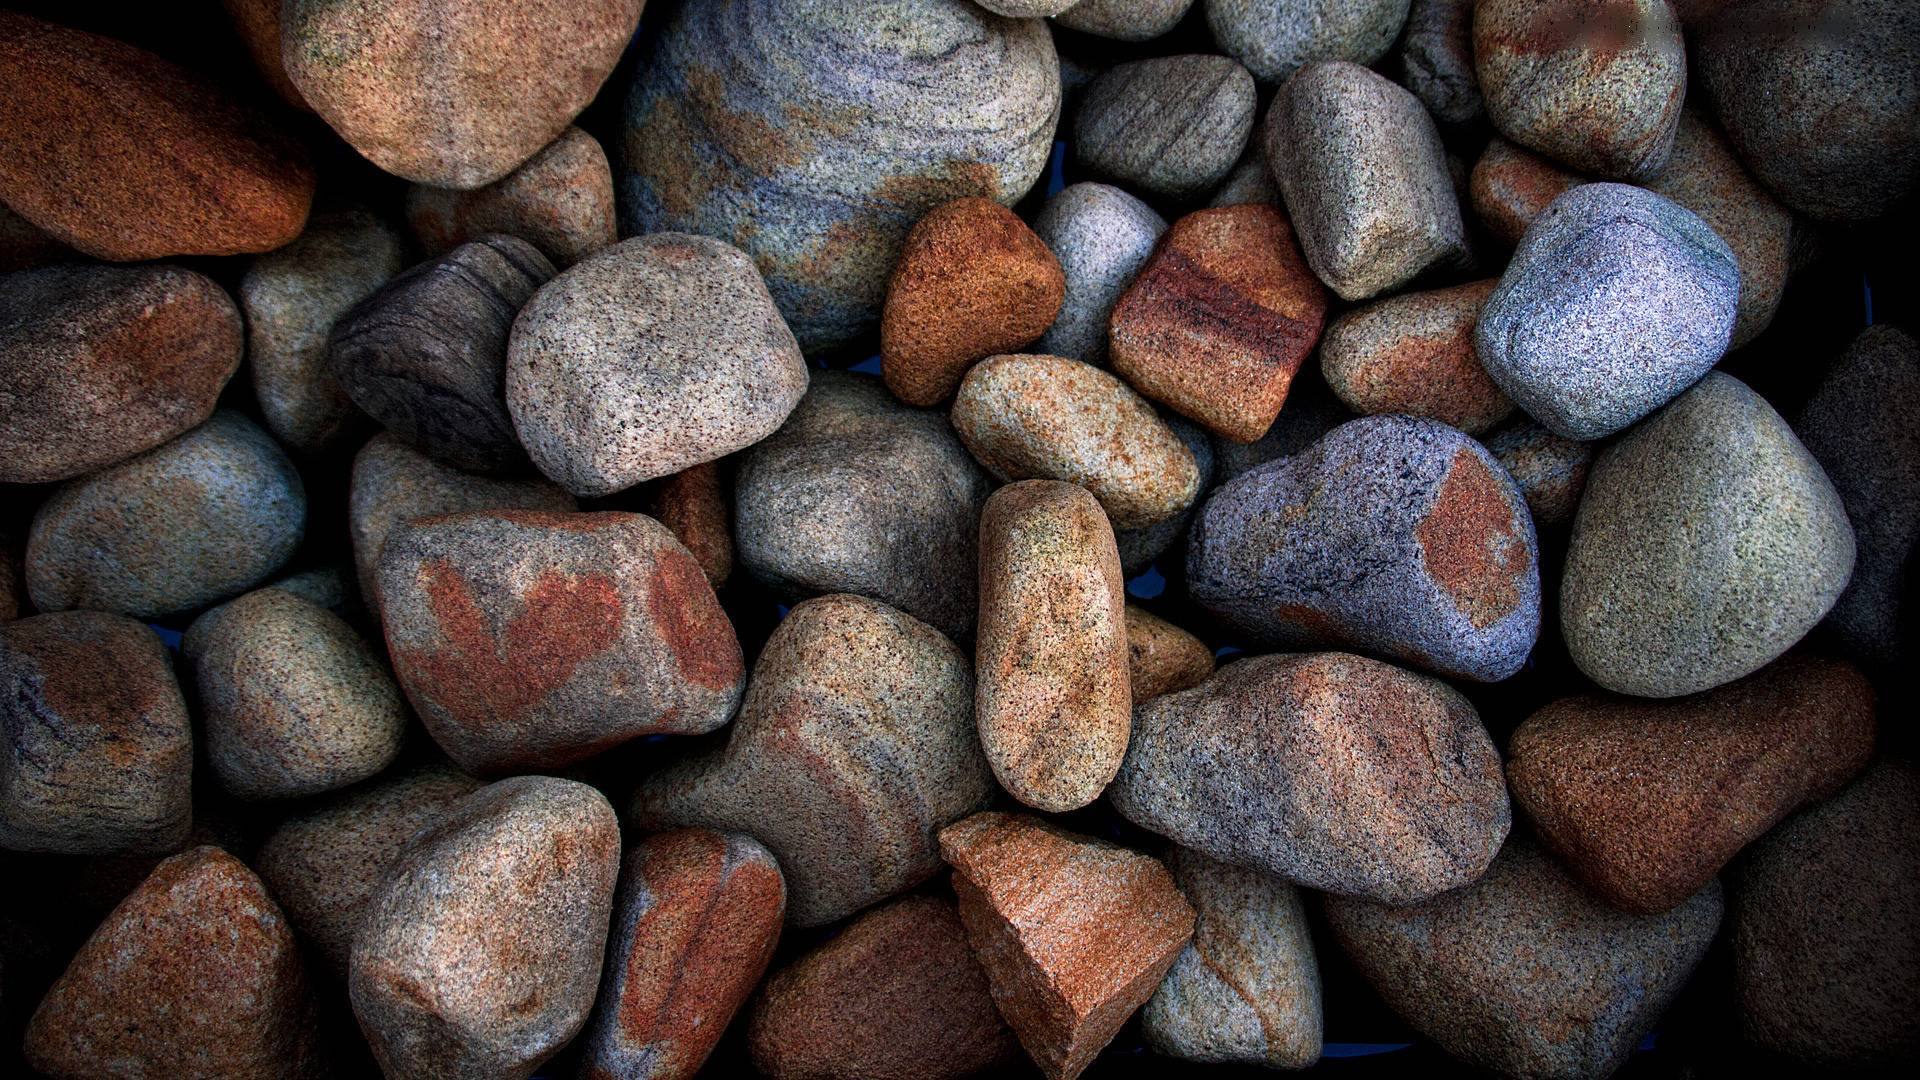 Beautiful Colorful Stone Wallpaper Backgrounds Wallpapers - Stone In Water  Colourful Stones - 1920x1080 Wallpaper 